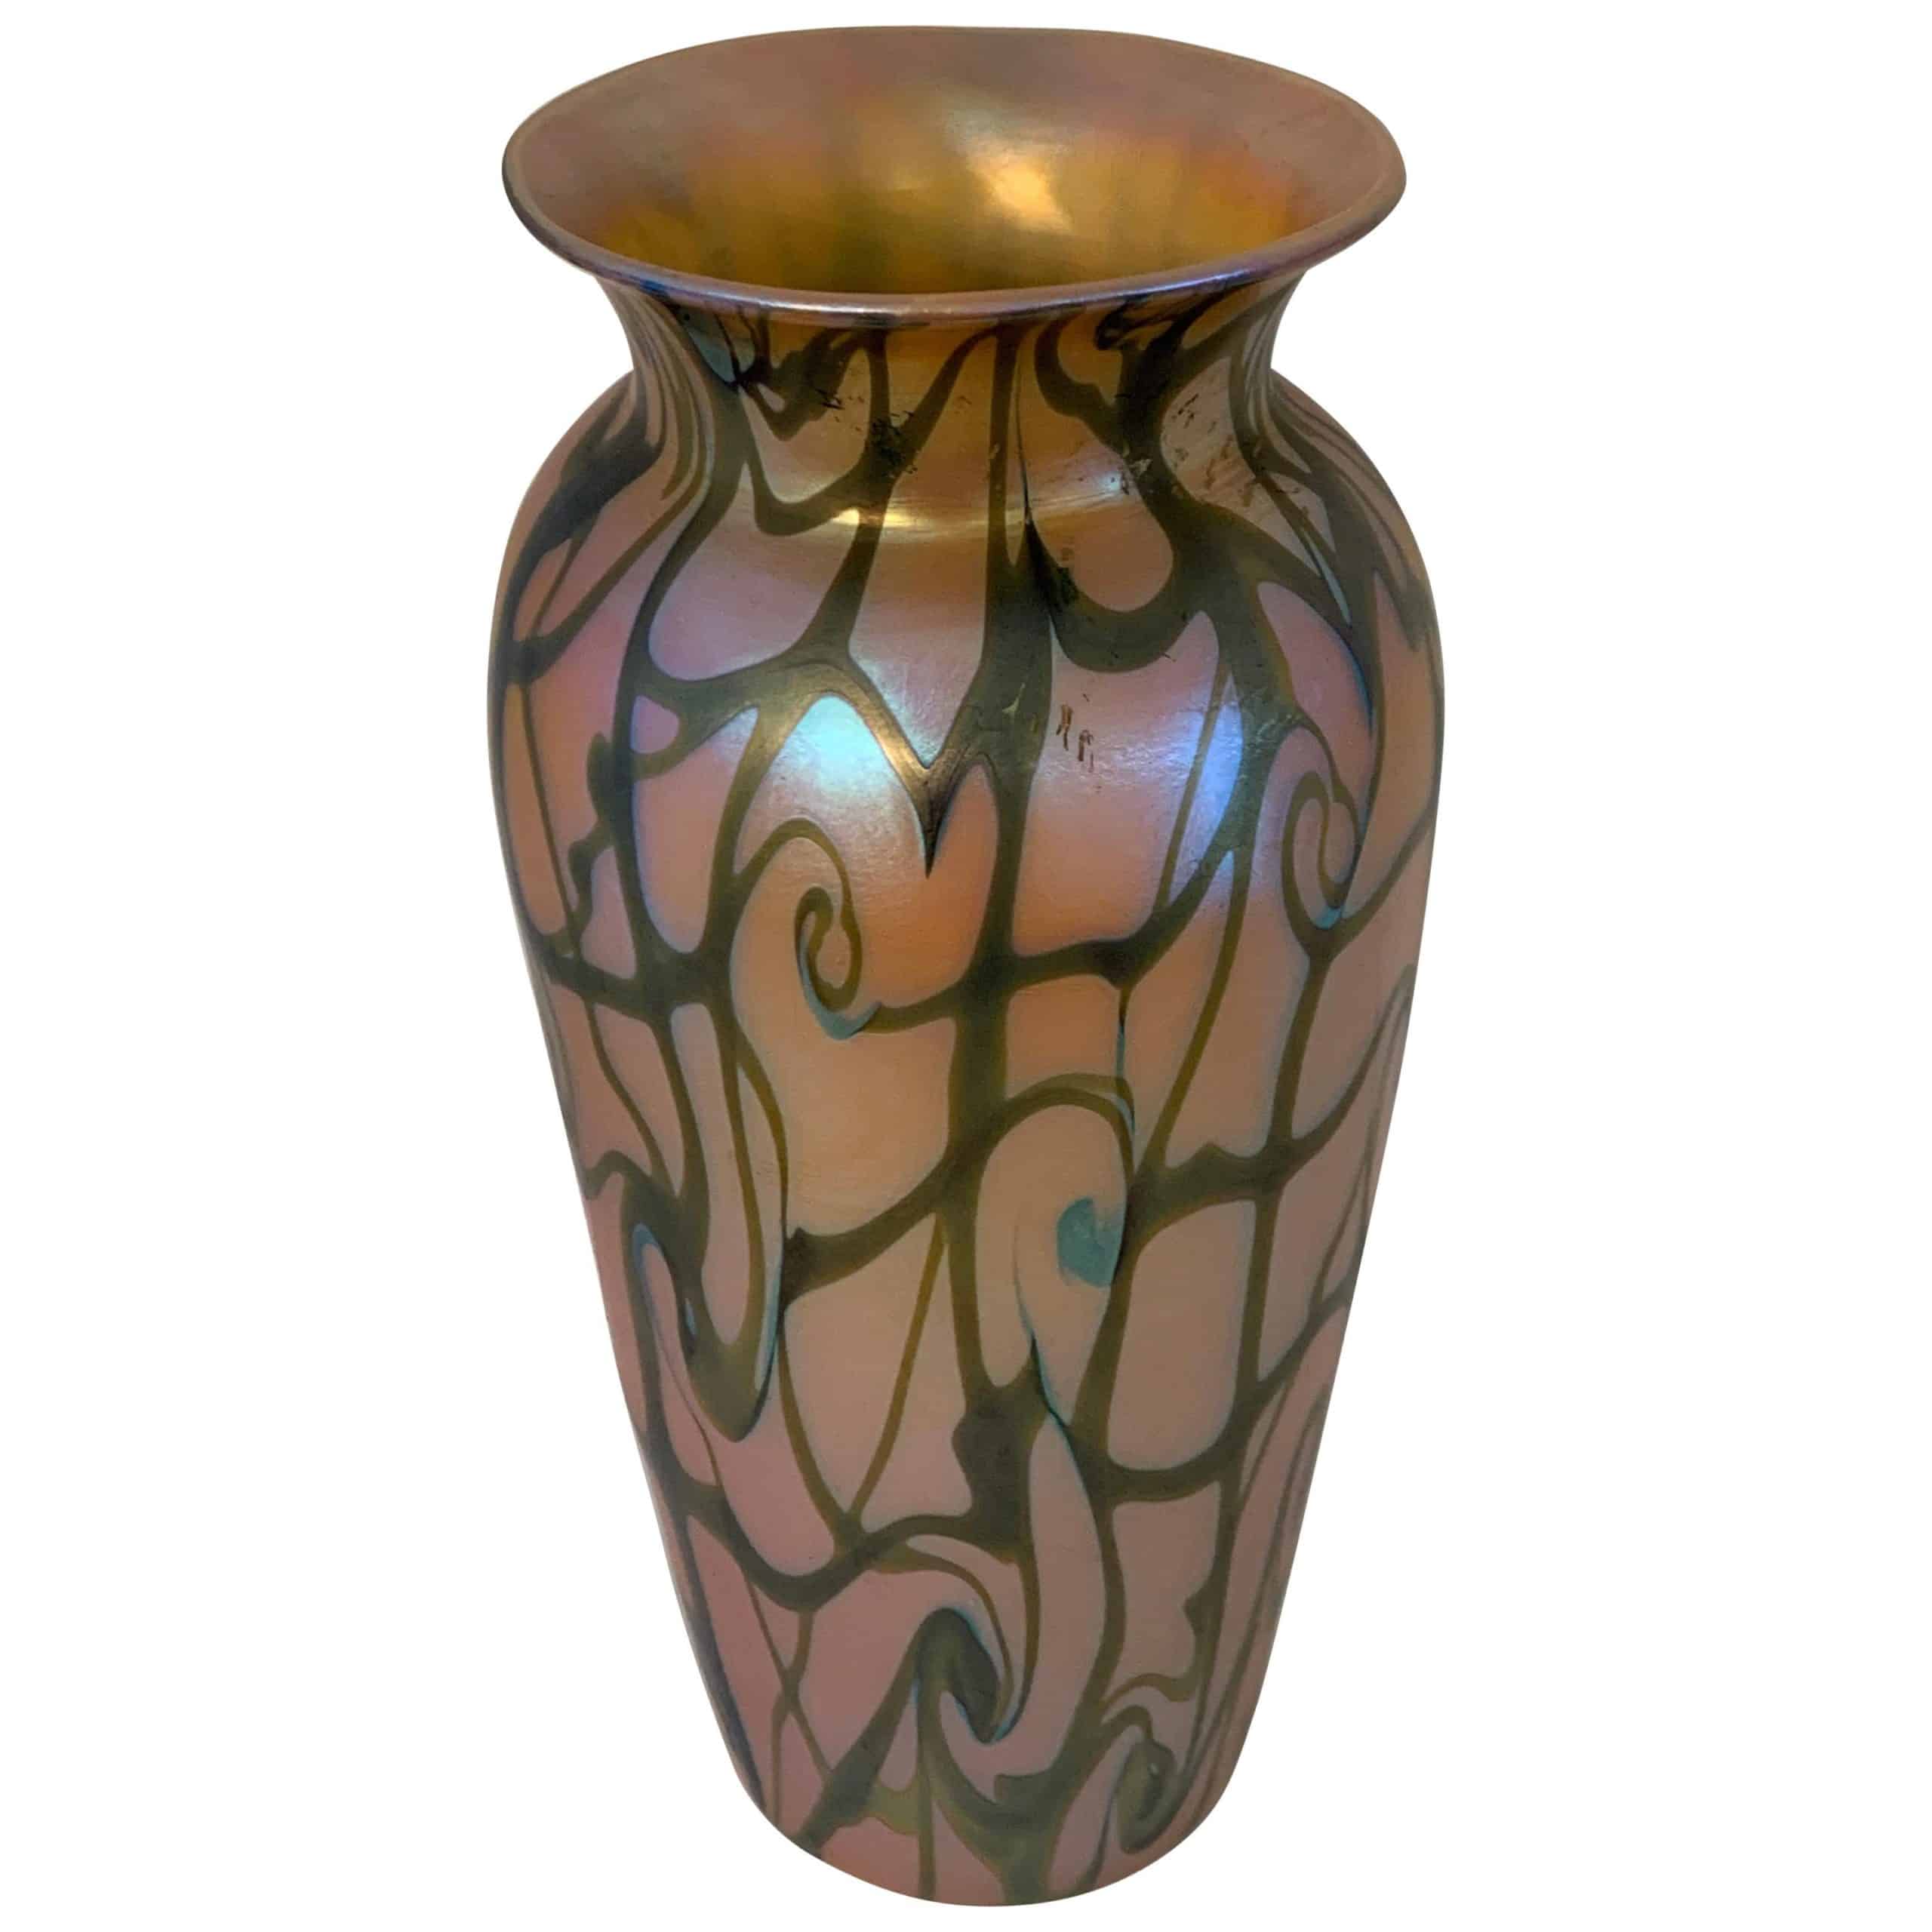 Durand vase with a King Tut pattern